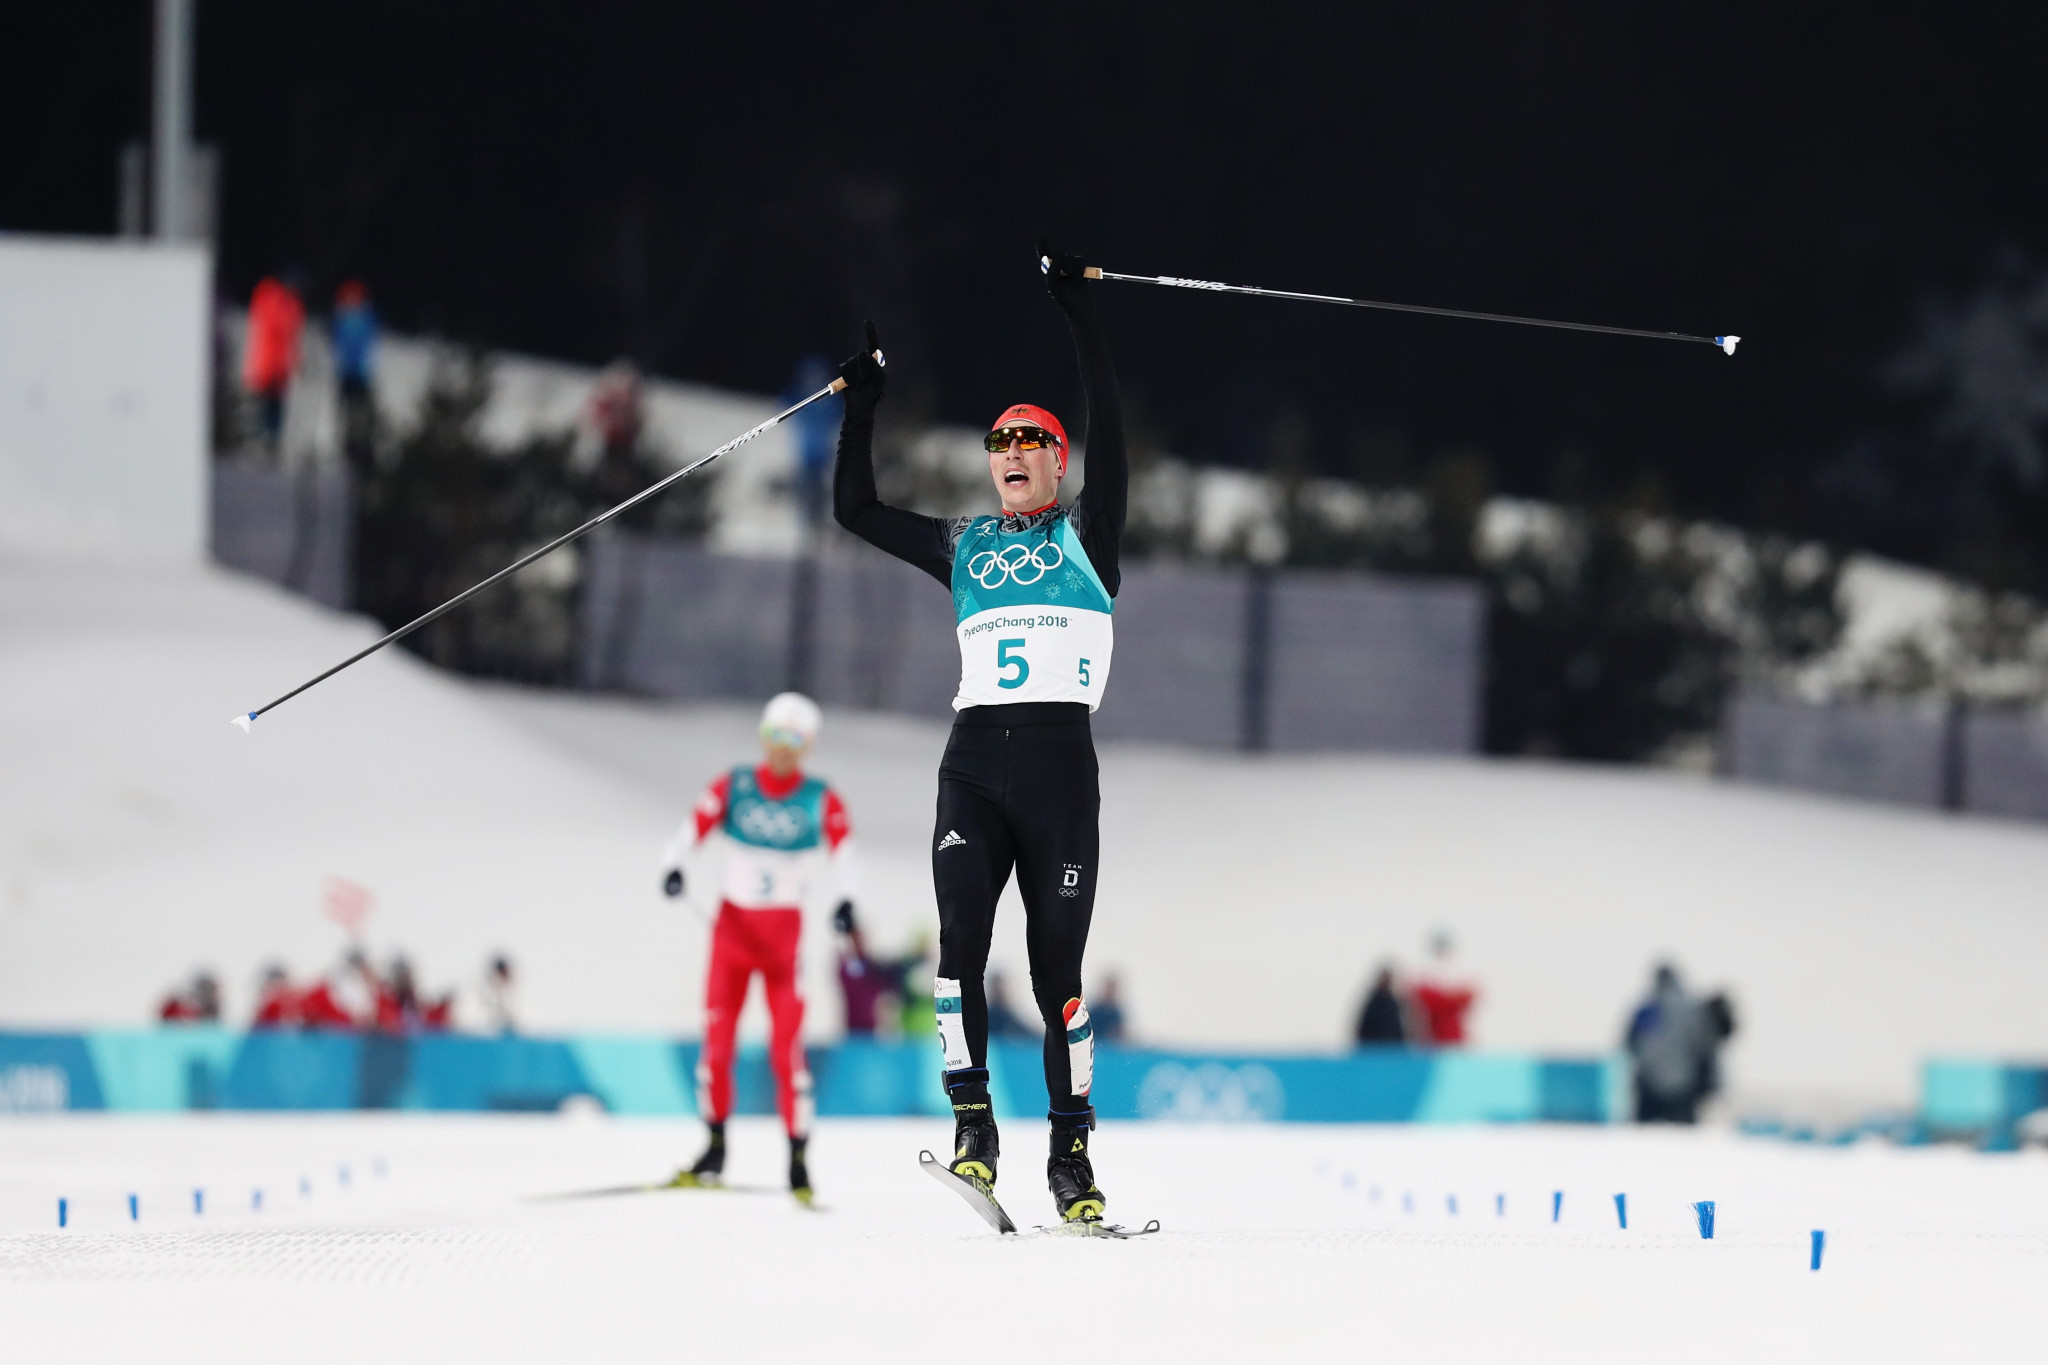 Germany's Sochi 2014 and Pyeongchang 2018 gold medallist Eric Frenzel has tested positive for COVID-19 at Beijing 2022 and is set to be unable to defend his title ©Getty Images